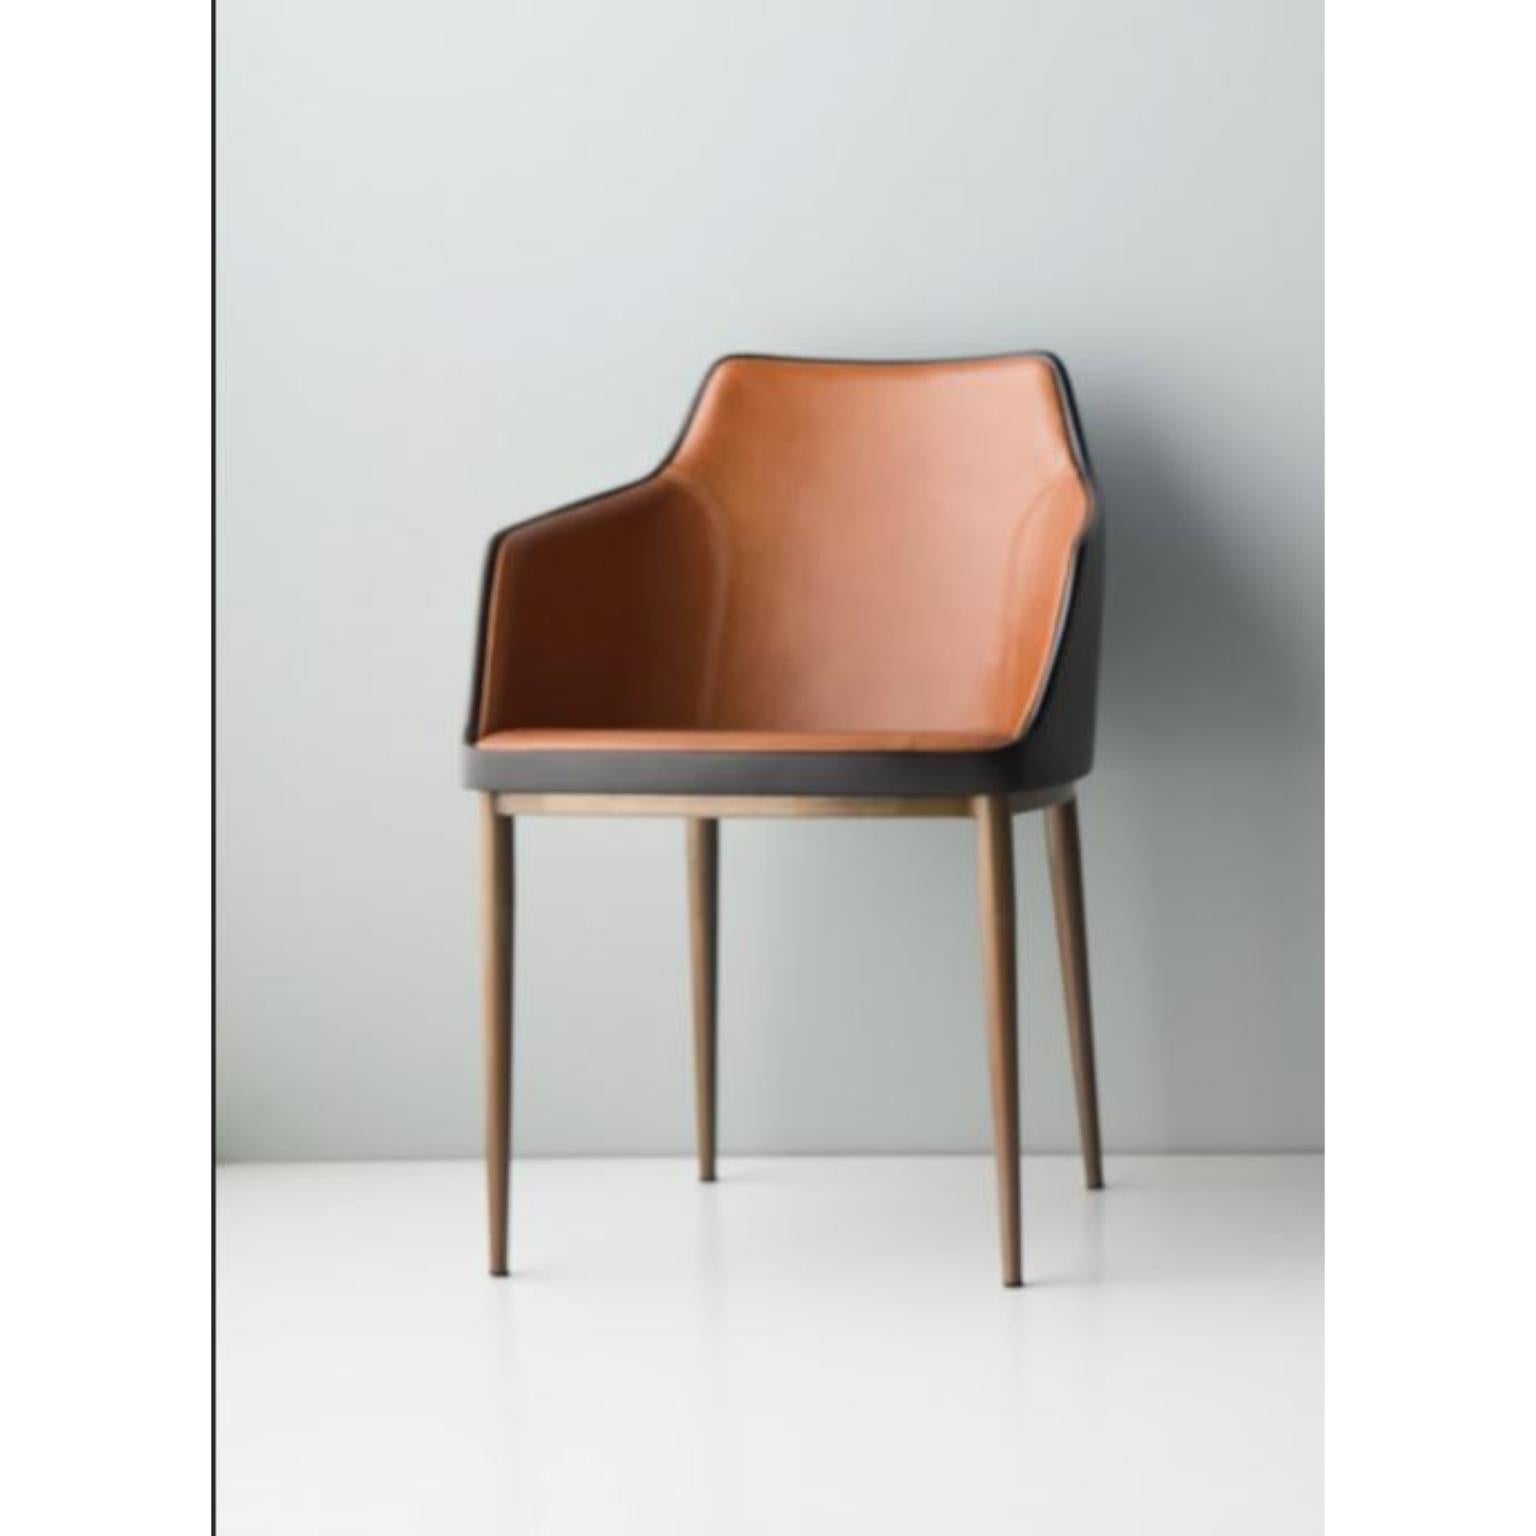 Bloo Chair with Arms by Doimo Brasil
Dimensions: W 50 x D 53 x H 79 cm 
Materials: Metal and fiberglass chair with upholstered seat.


With the intention of providing good taste and personality, Doimo deciphers trends and follows the evolution of